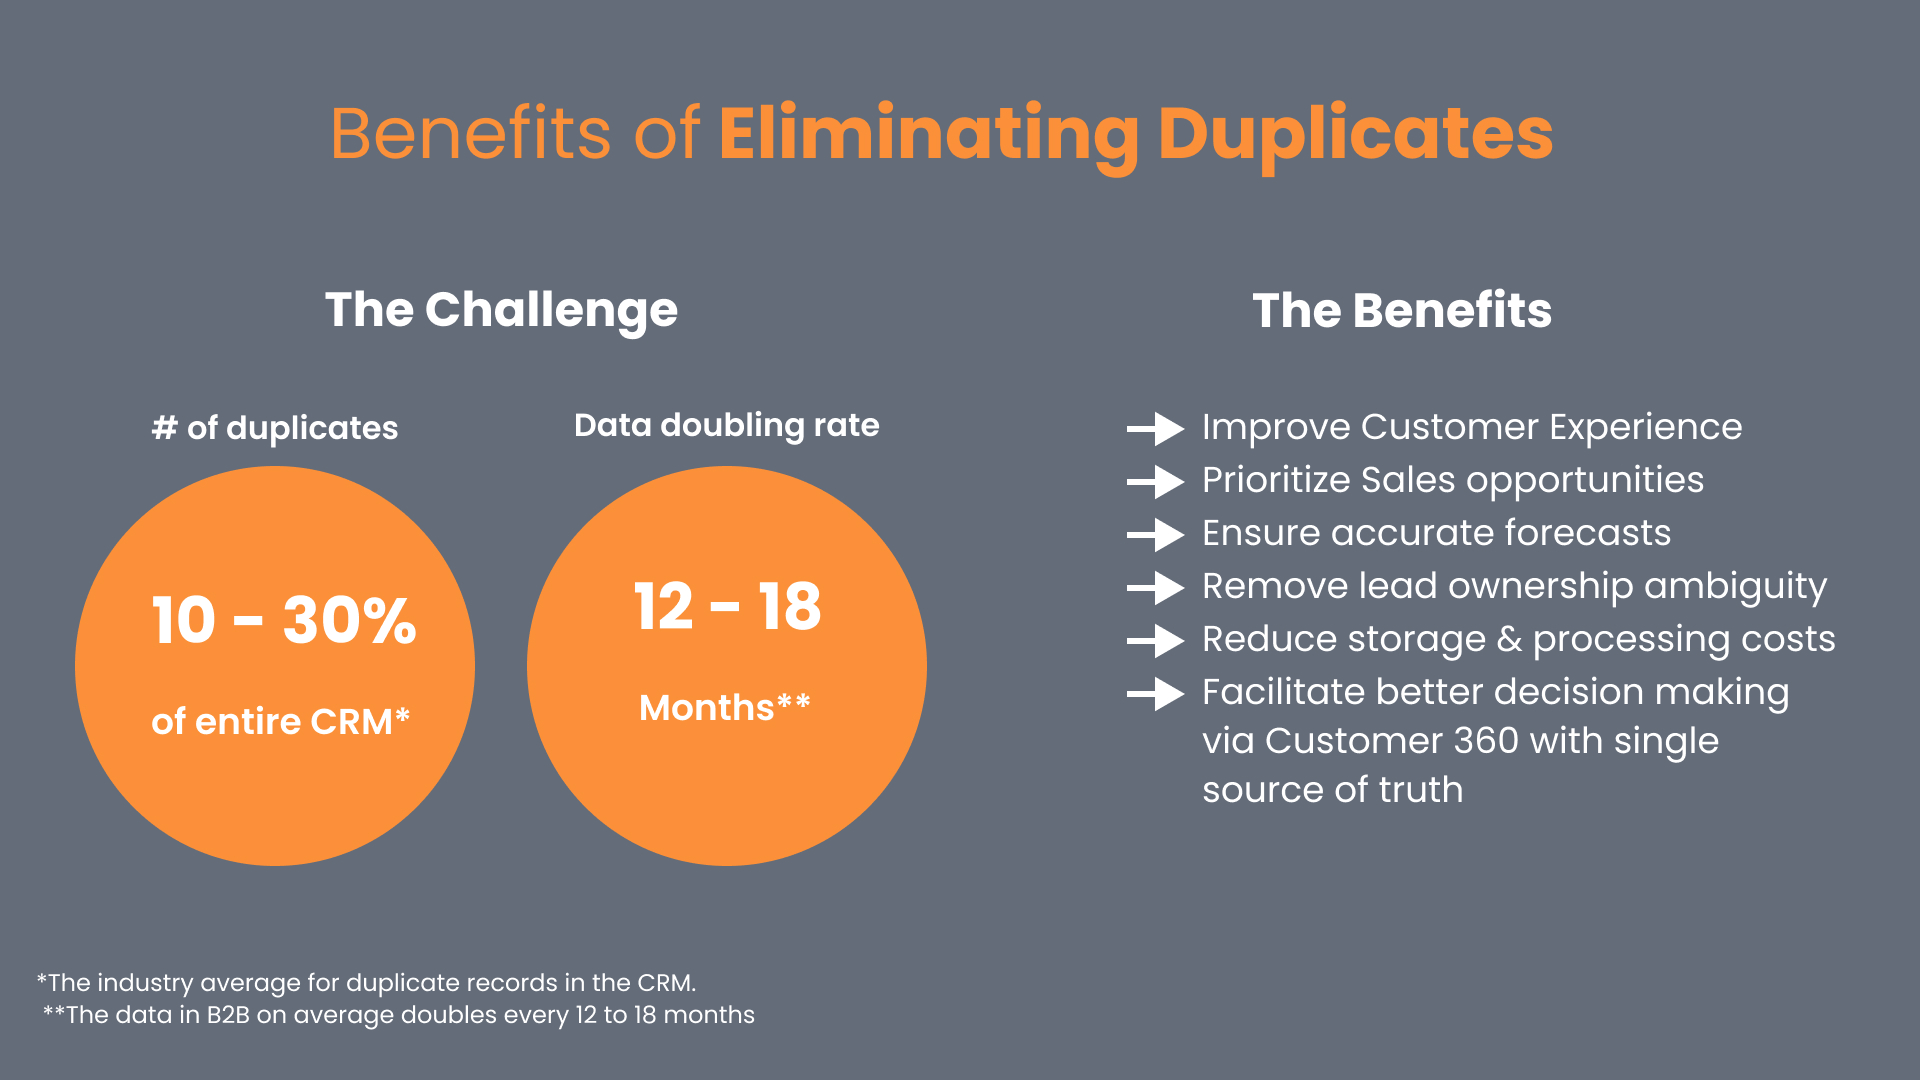 The benefits of using Delpha include establishing a single source of truth or 360-degree view of their contacts, improving Salesforce adoption with trusted data.